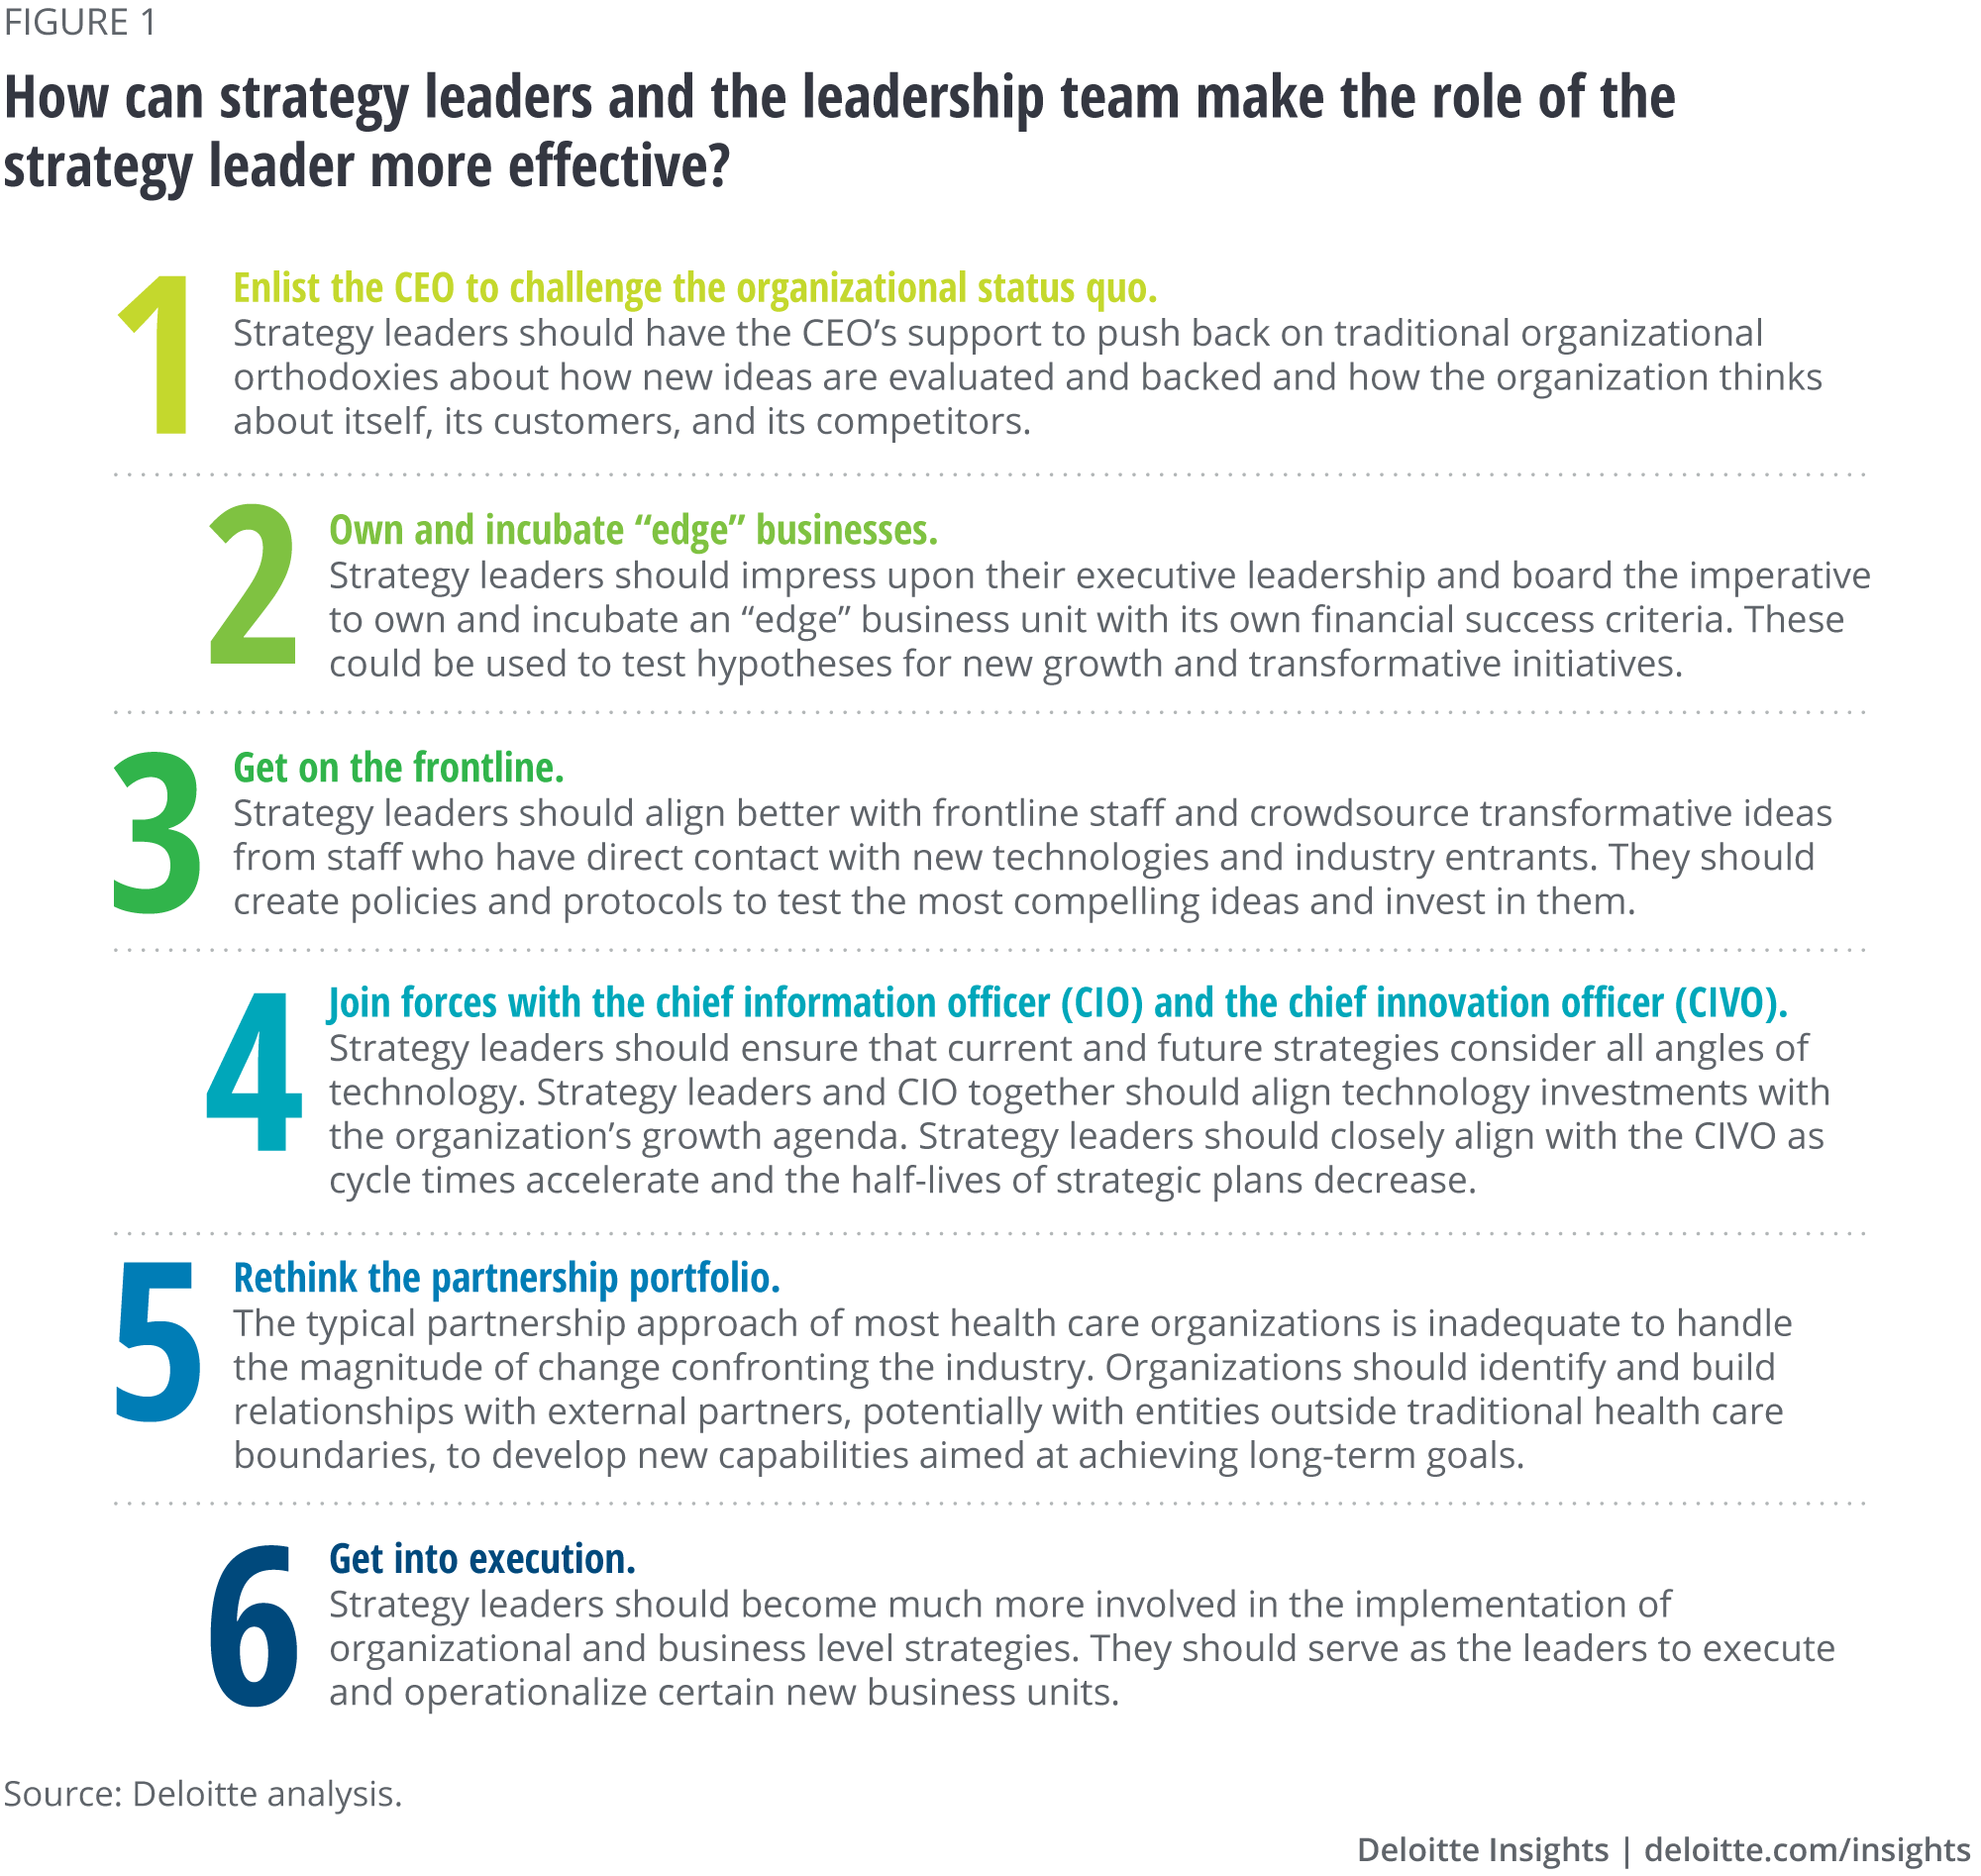 How can strategy leaders and the leadership team make the role of the strategy leader more effective?